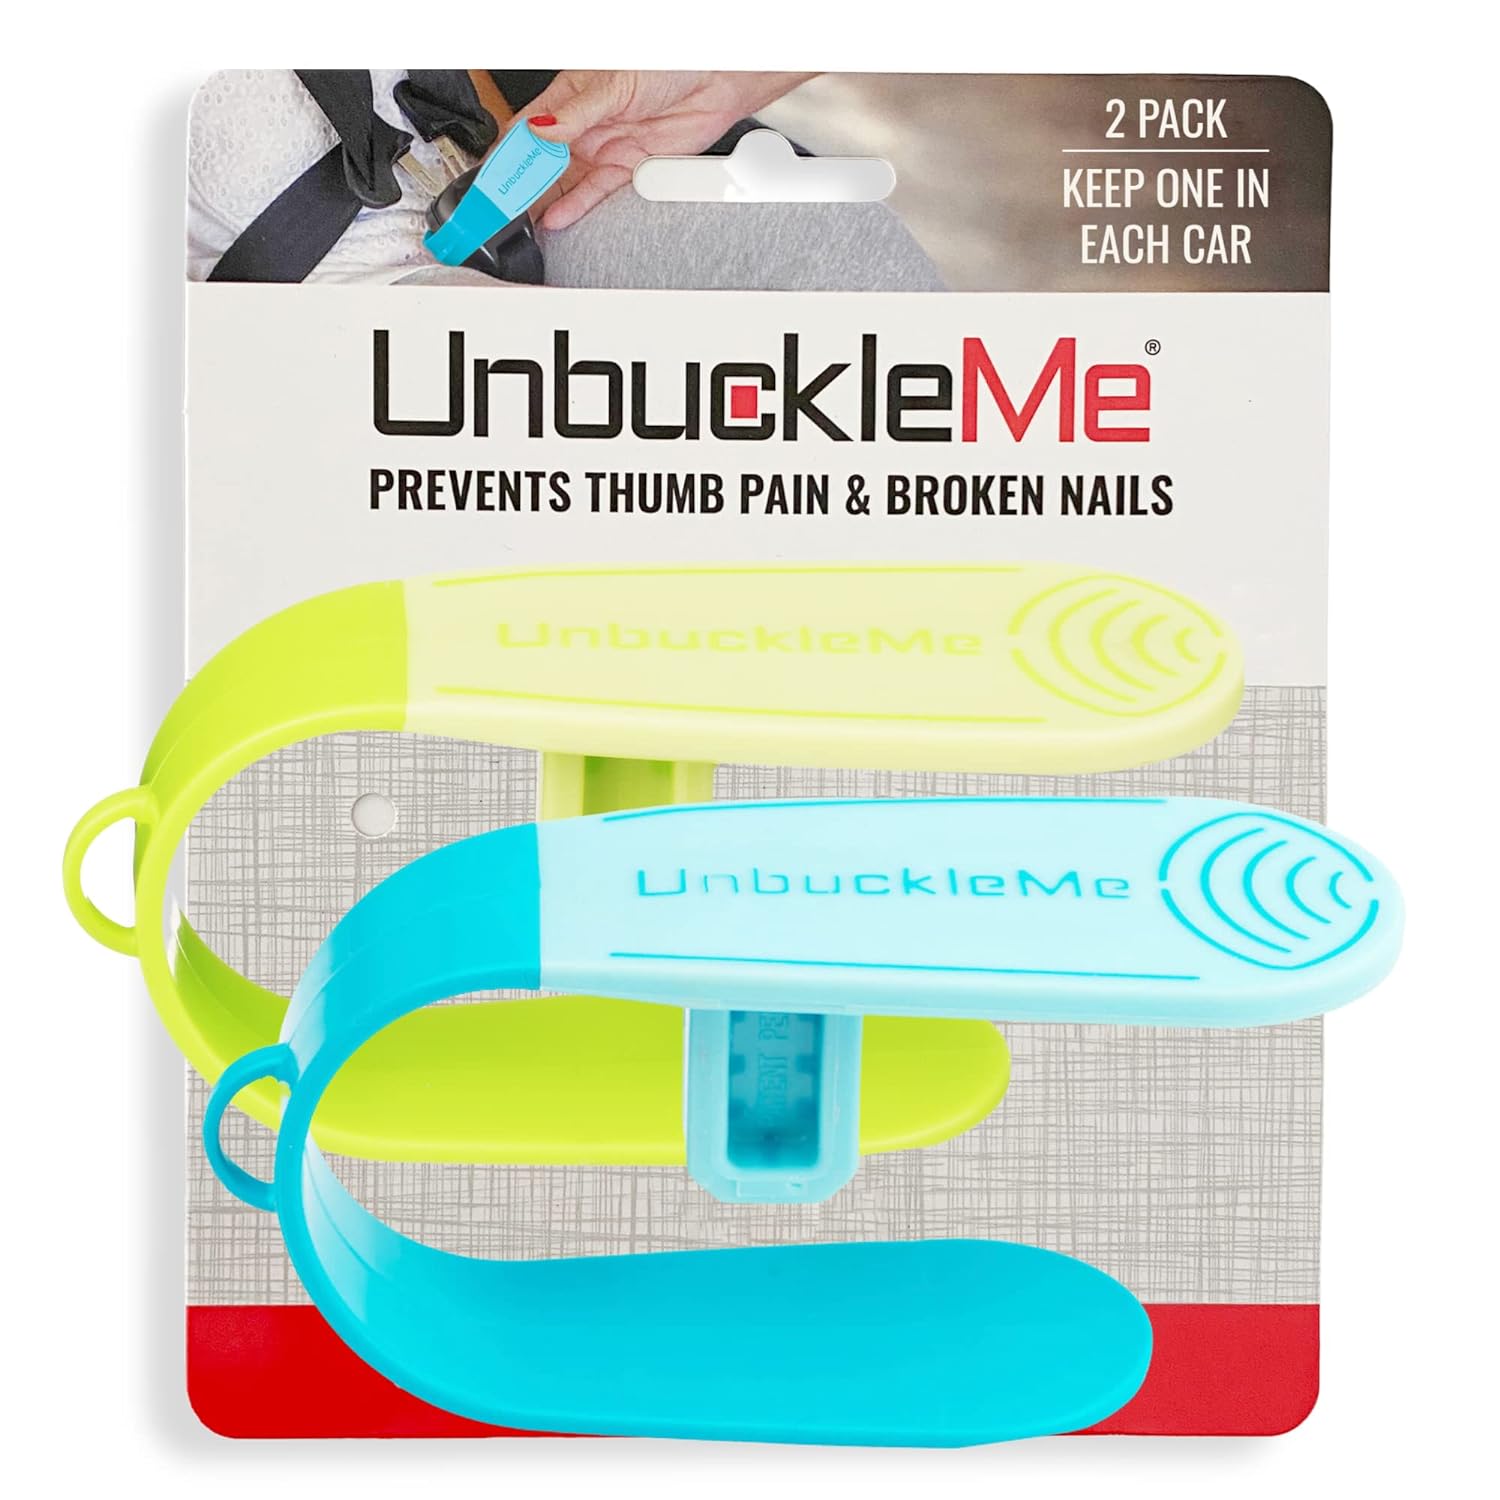 UnbuckleMe Car Seat Buckle Release Tool (As Seen on Shark Tank) - Easy Opener Aid for Arthritis, Long Nails, Older Kids - Button Pusher for Infant, Toddler Car Seats (2 Pack, Blue Lime Green)